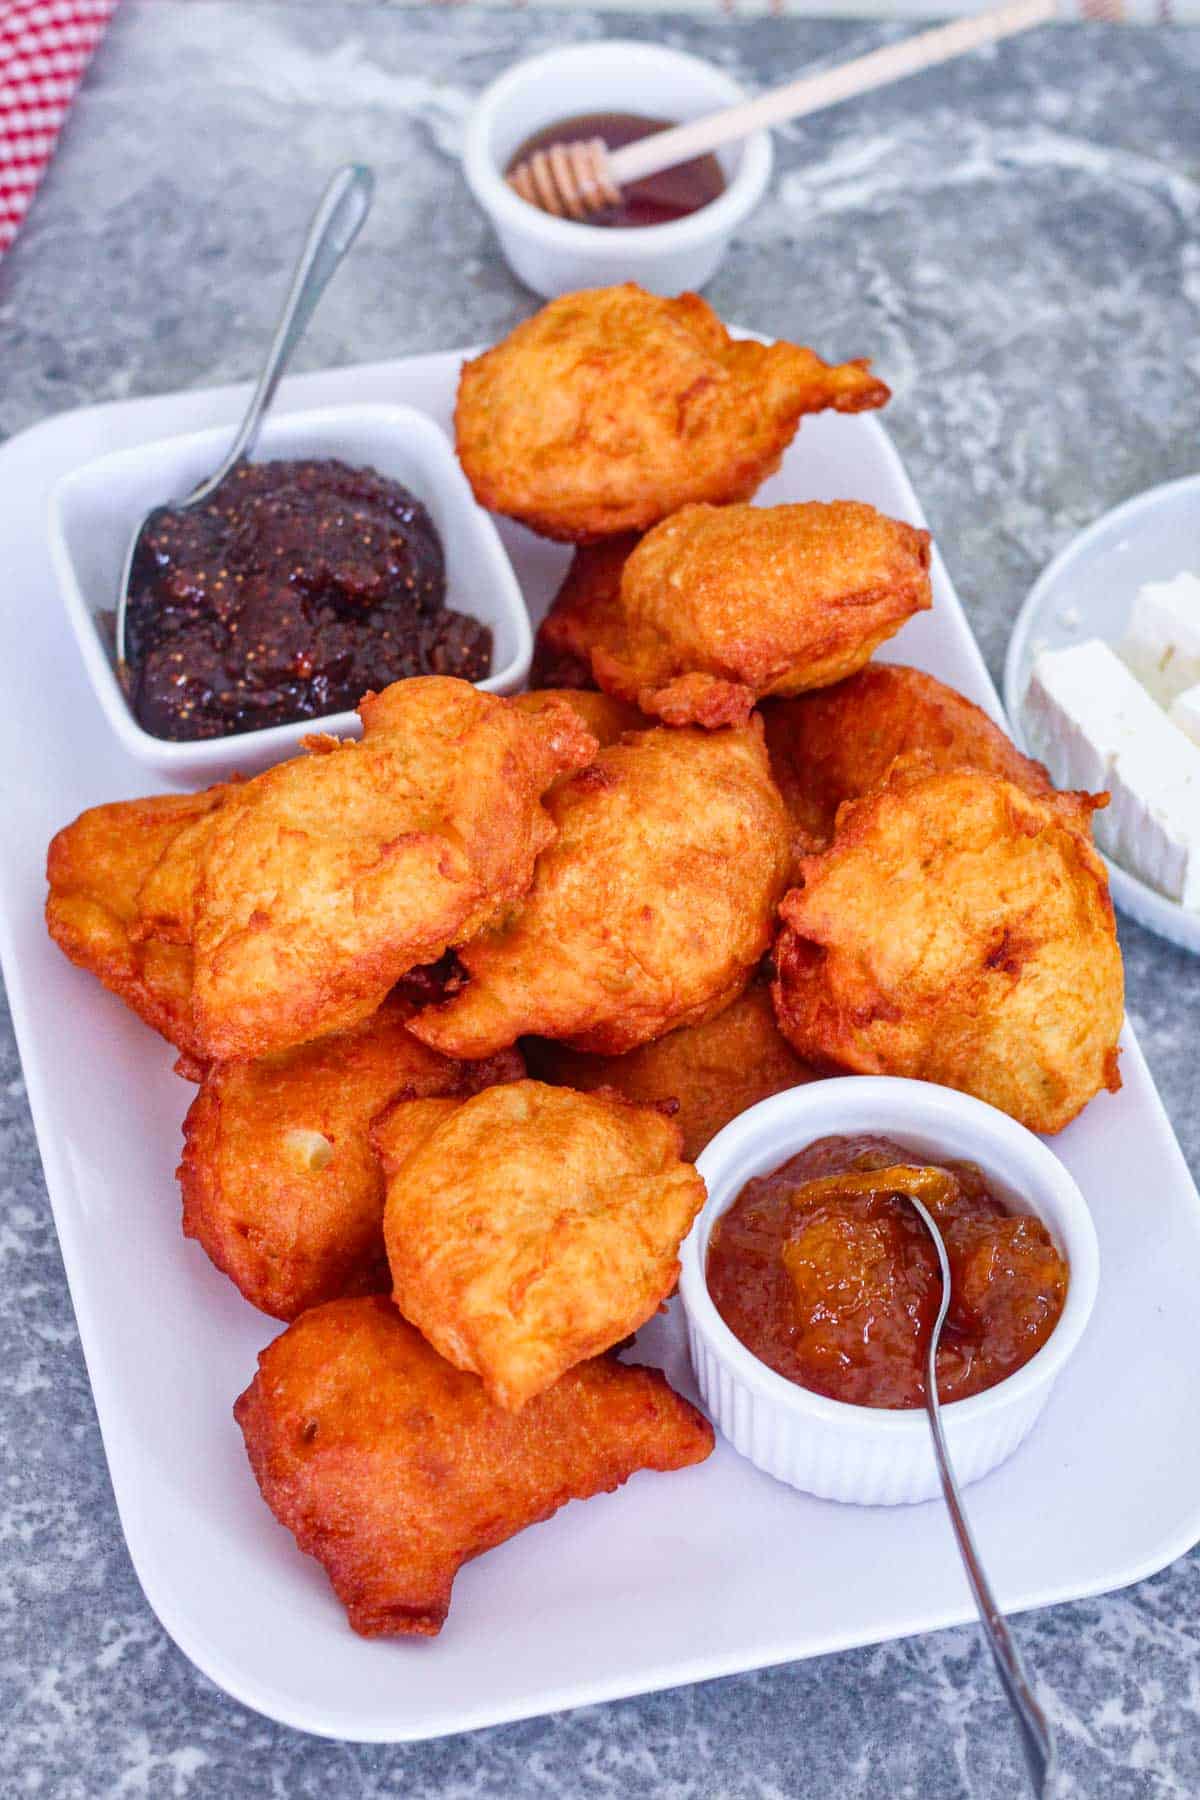 Albanian fried dough (petulla), shown on a platter served with two different jams, honey and feta cheese.